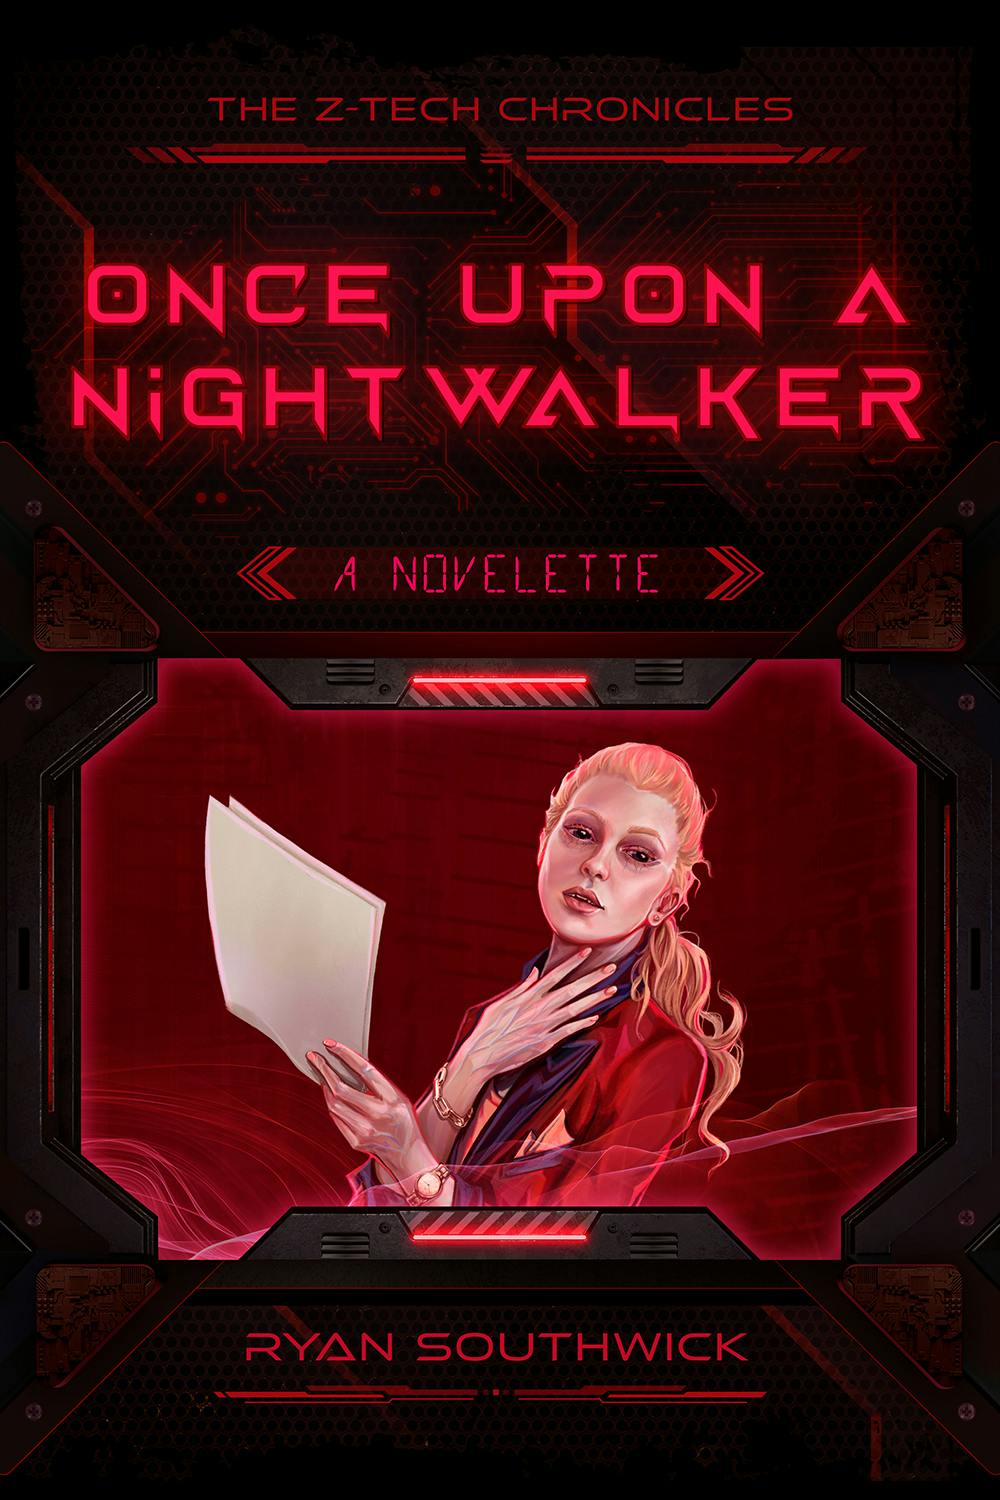 Once Upon a Nightwalker